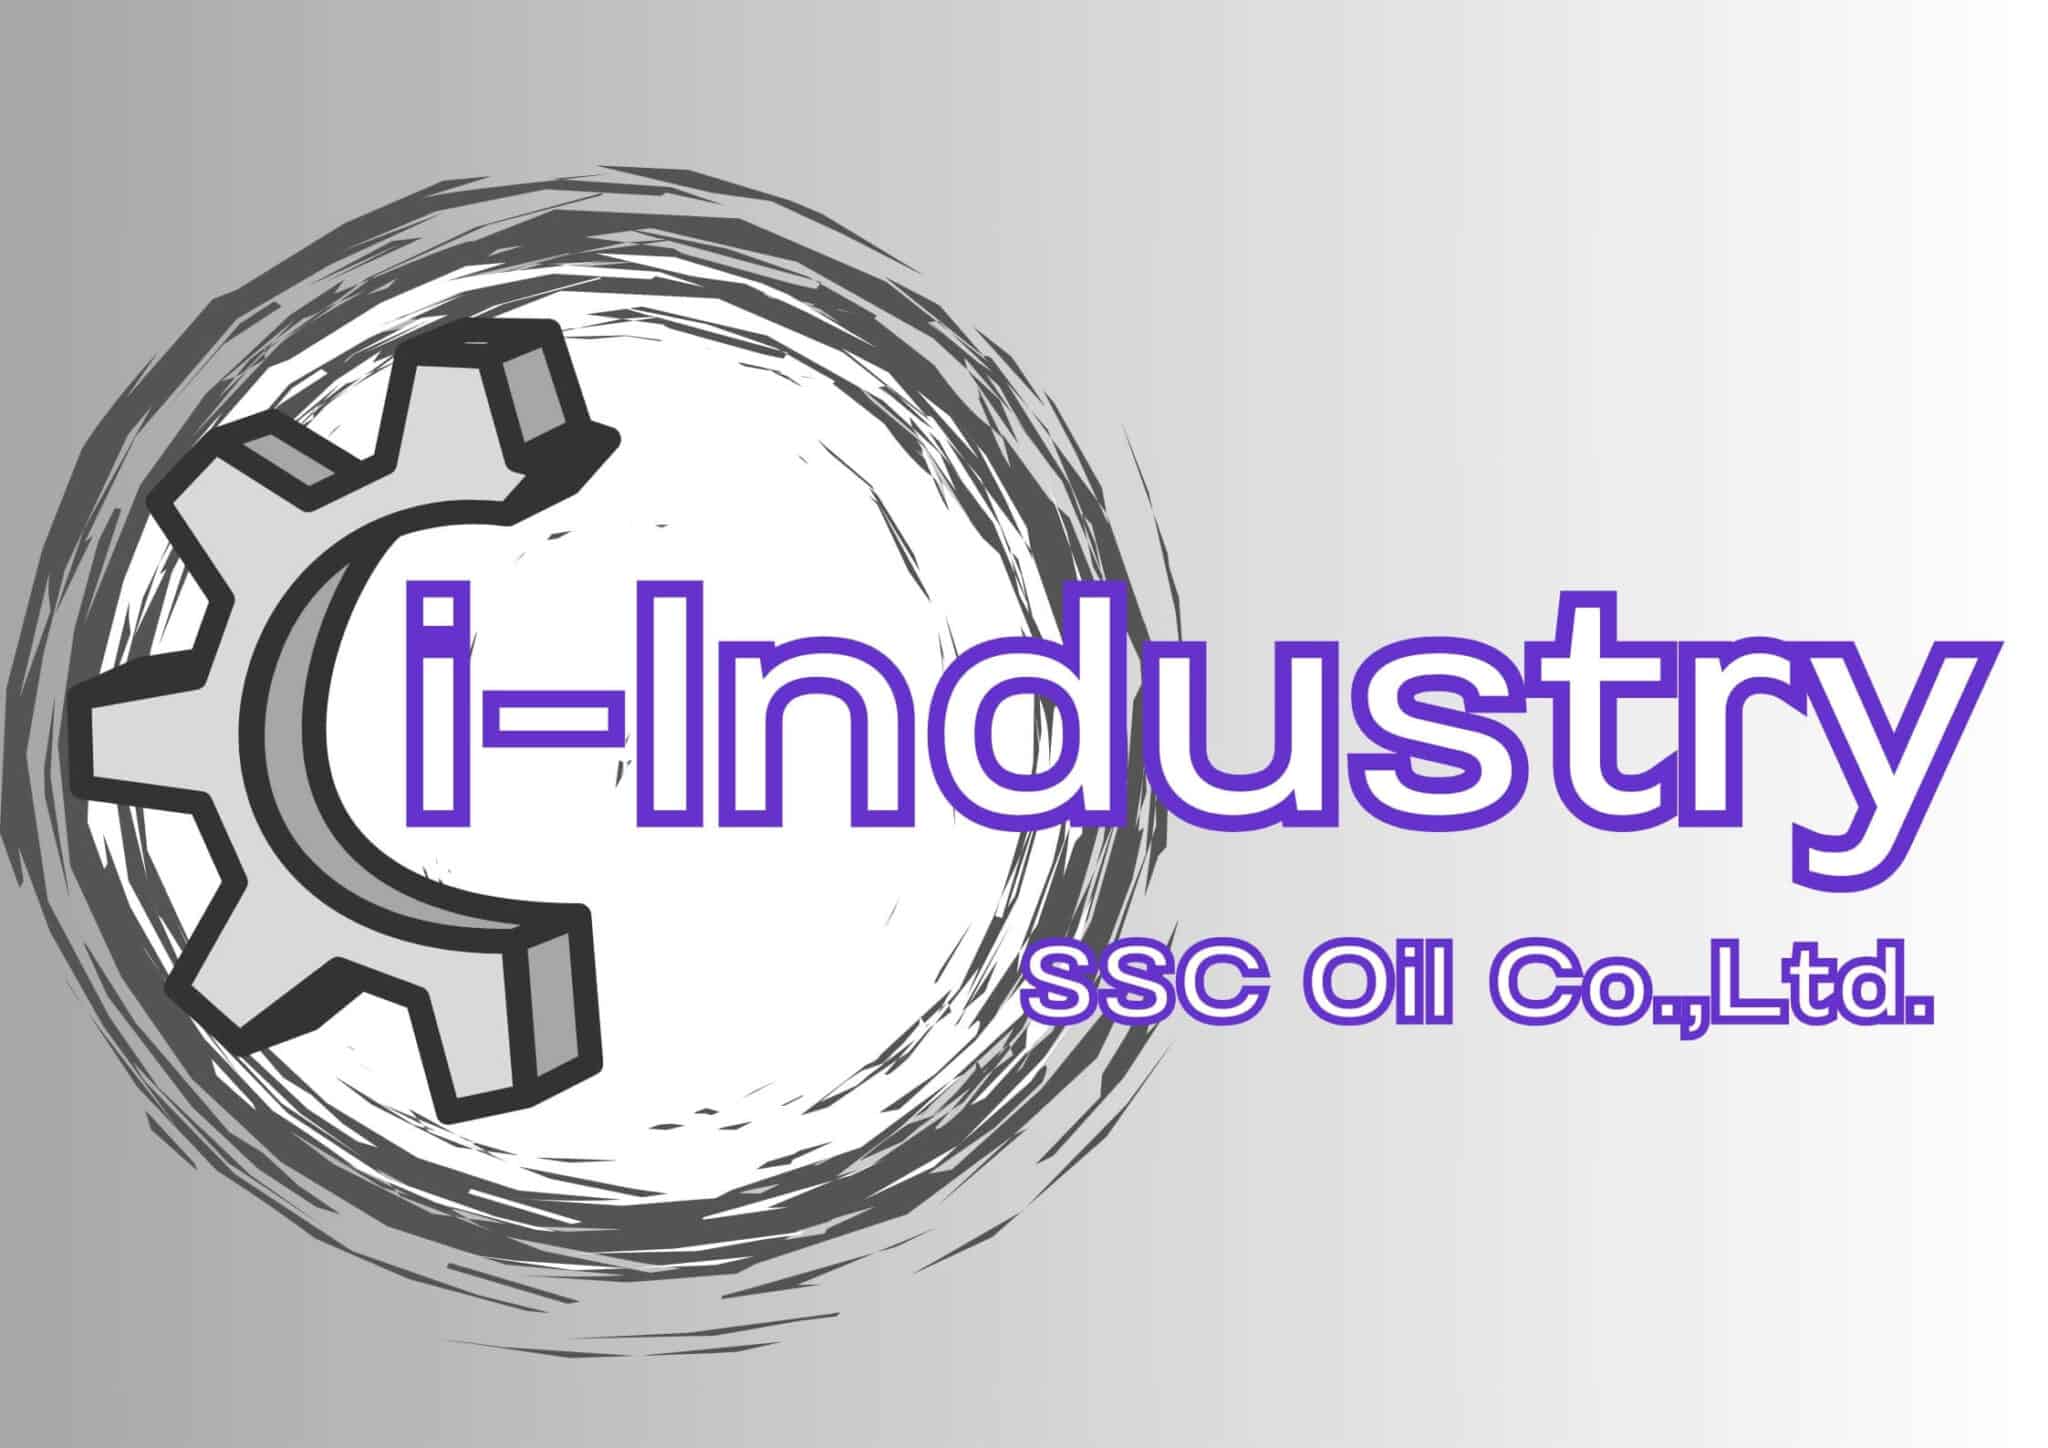 What is i-industry?